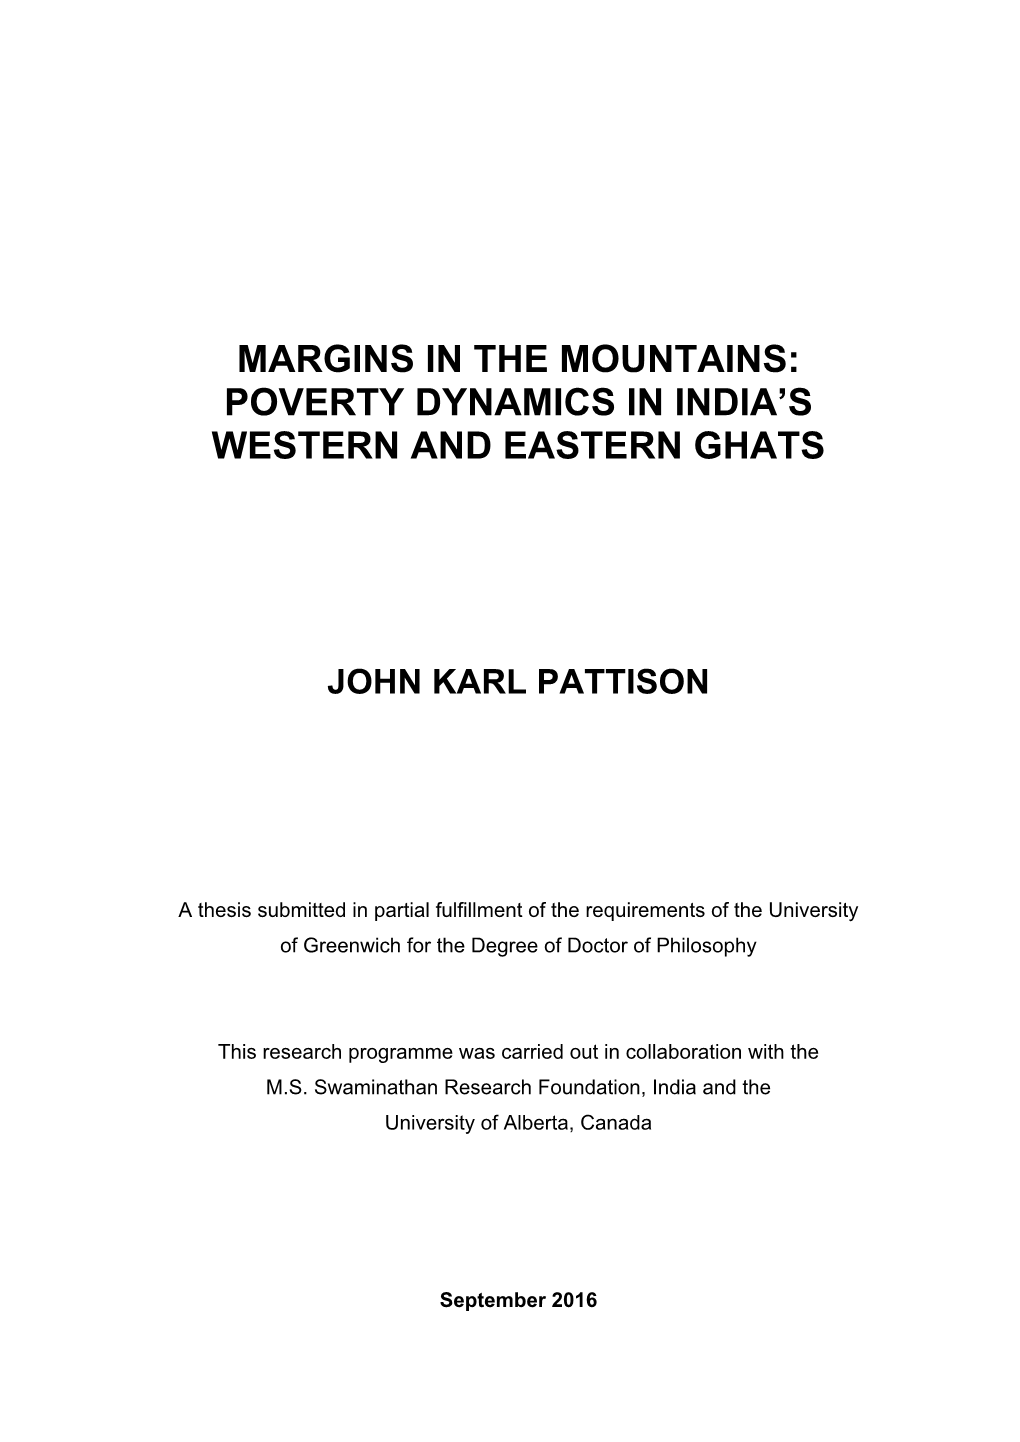 Poverty Dynamics in India's Western and Eastern Ghats